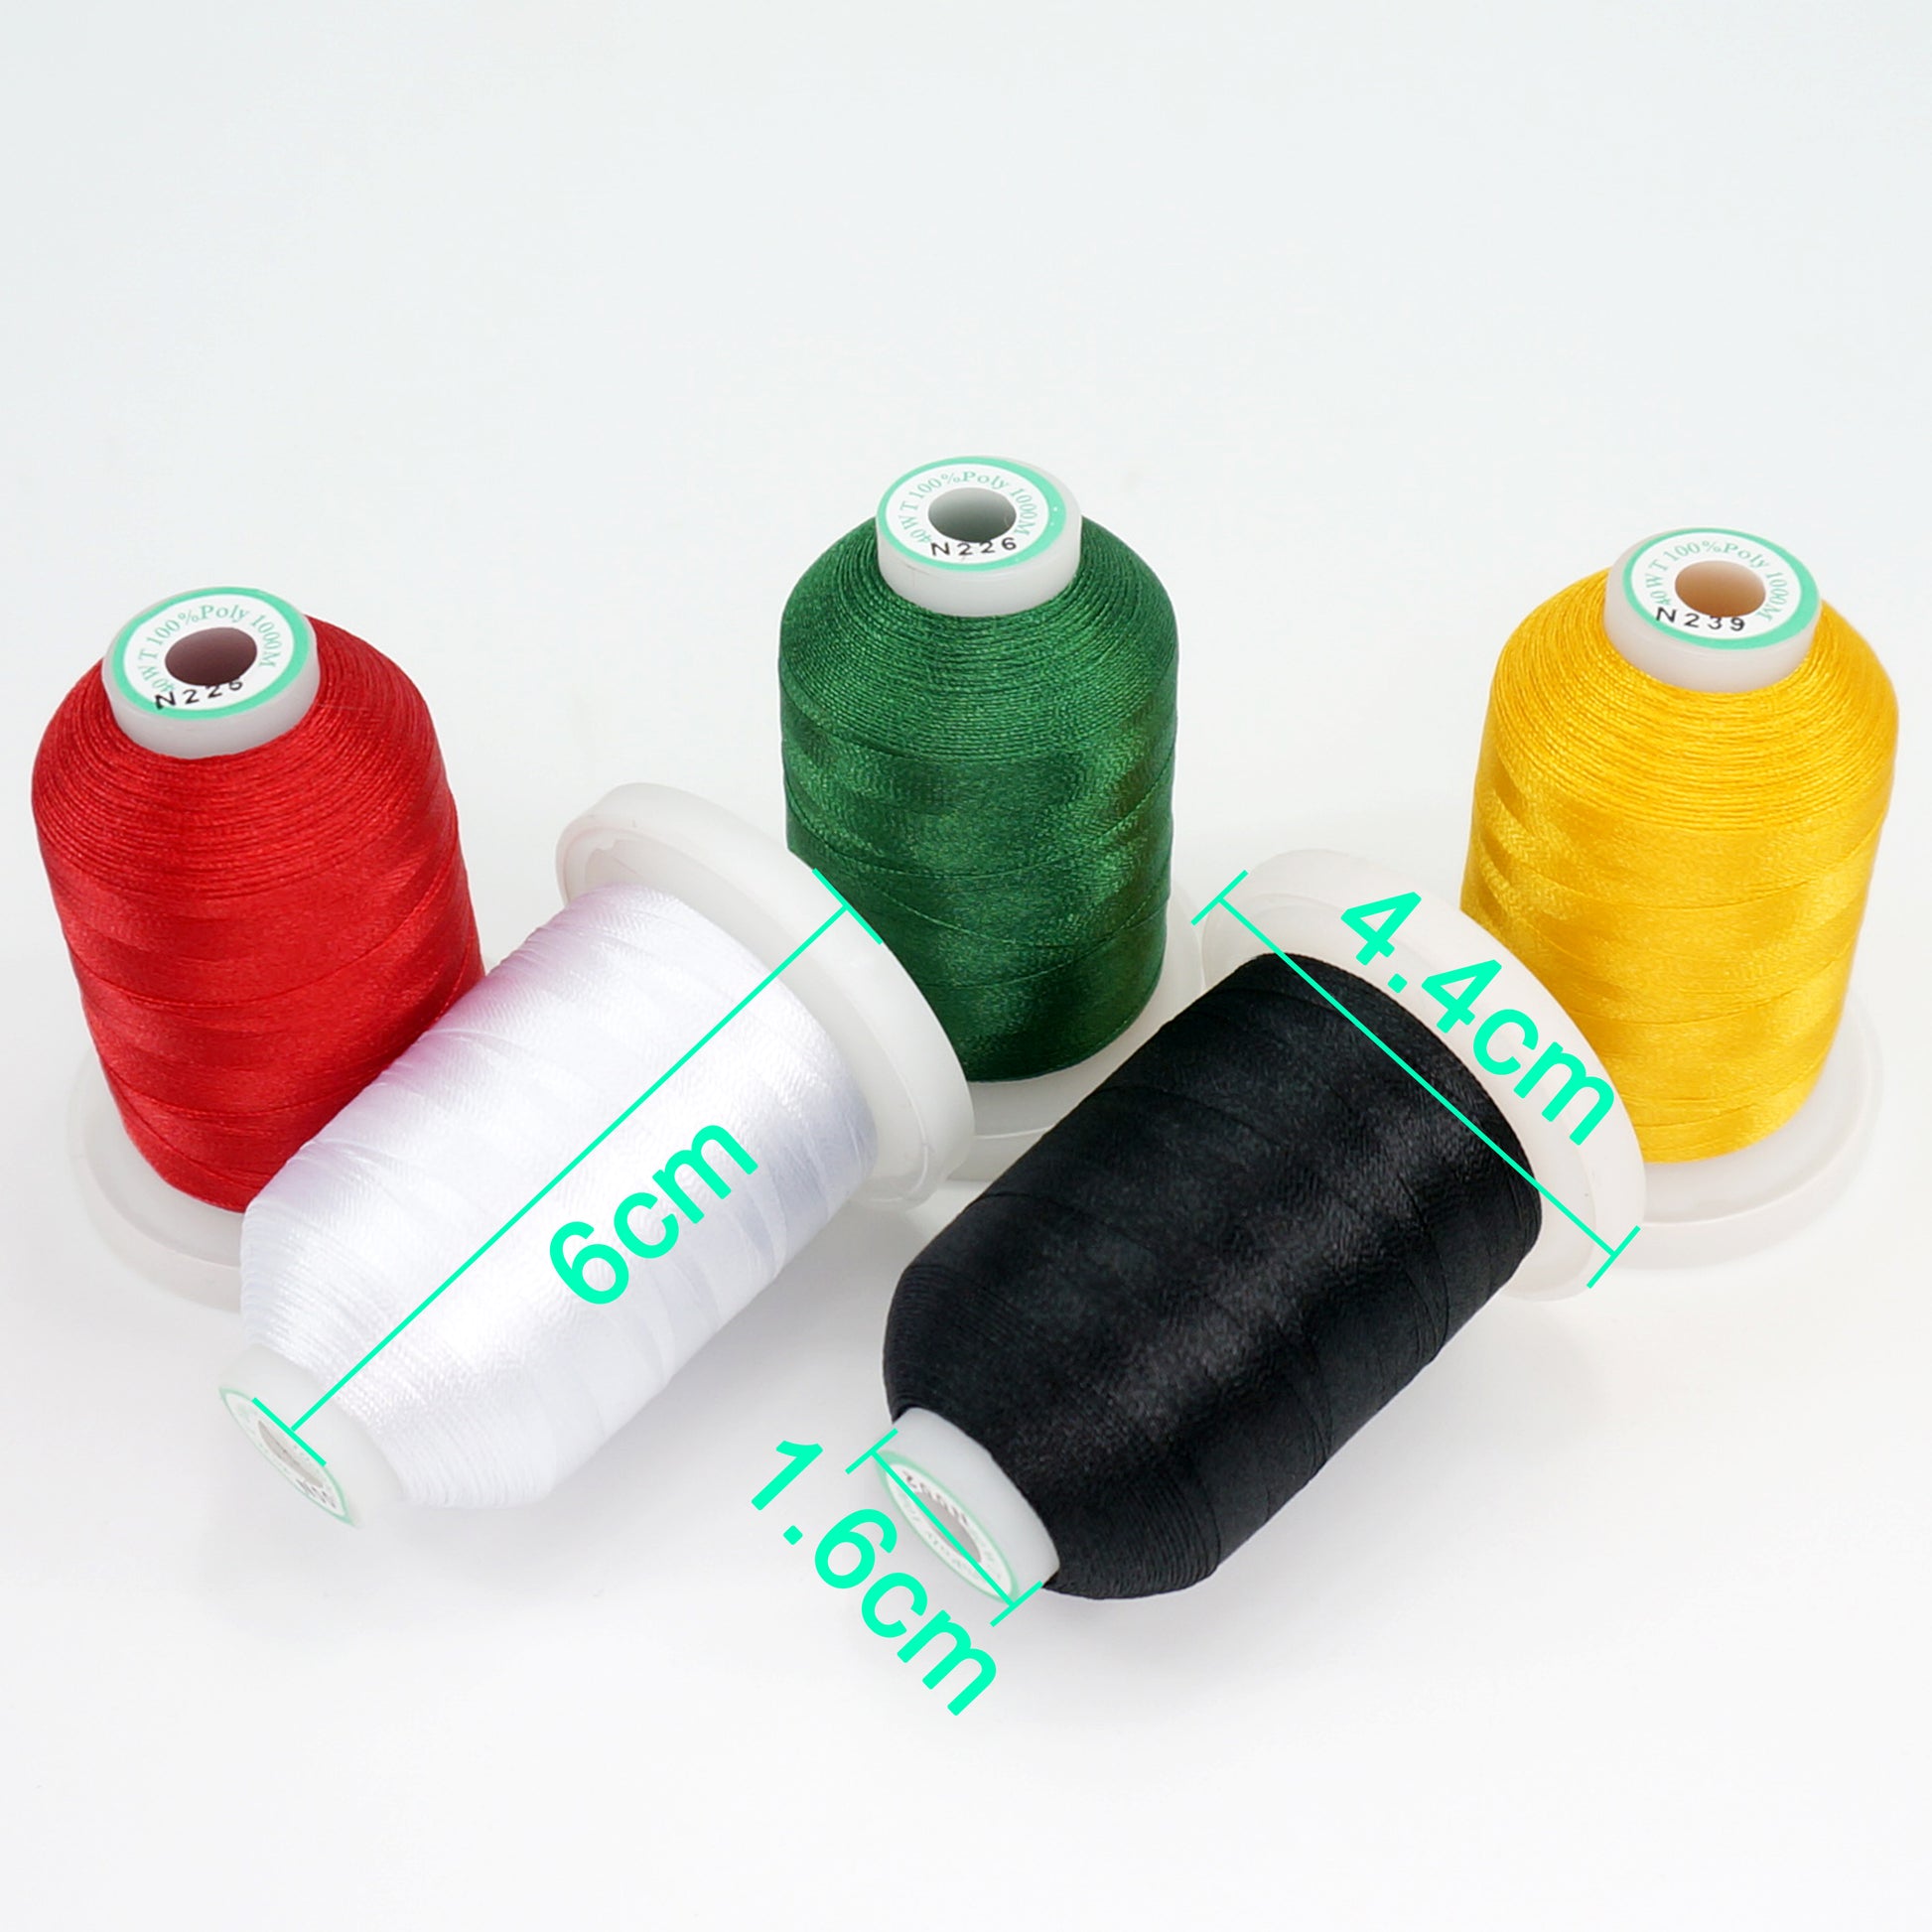 Simthread 40 Spools Polyester Embroidery Thread Vibrant Colors for Singer Brother Babylock Janome